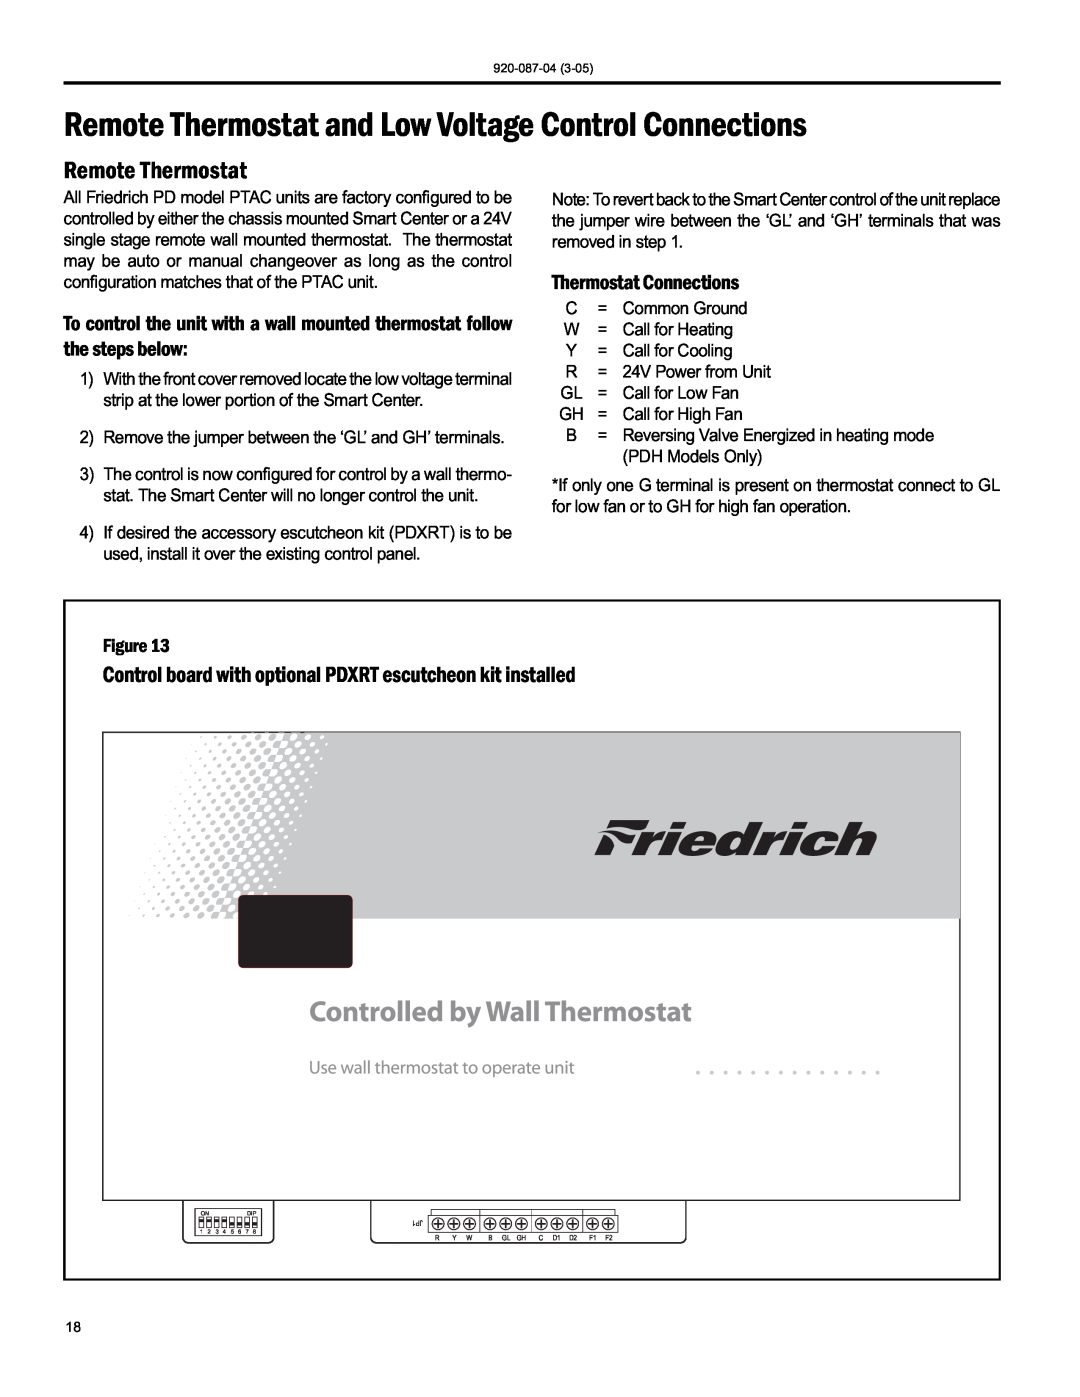 Friedrich 920-087-04 (3-05) manual Remote Thermostat, ThermostatConnections 